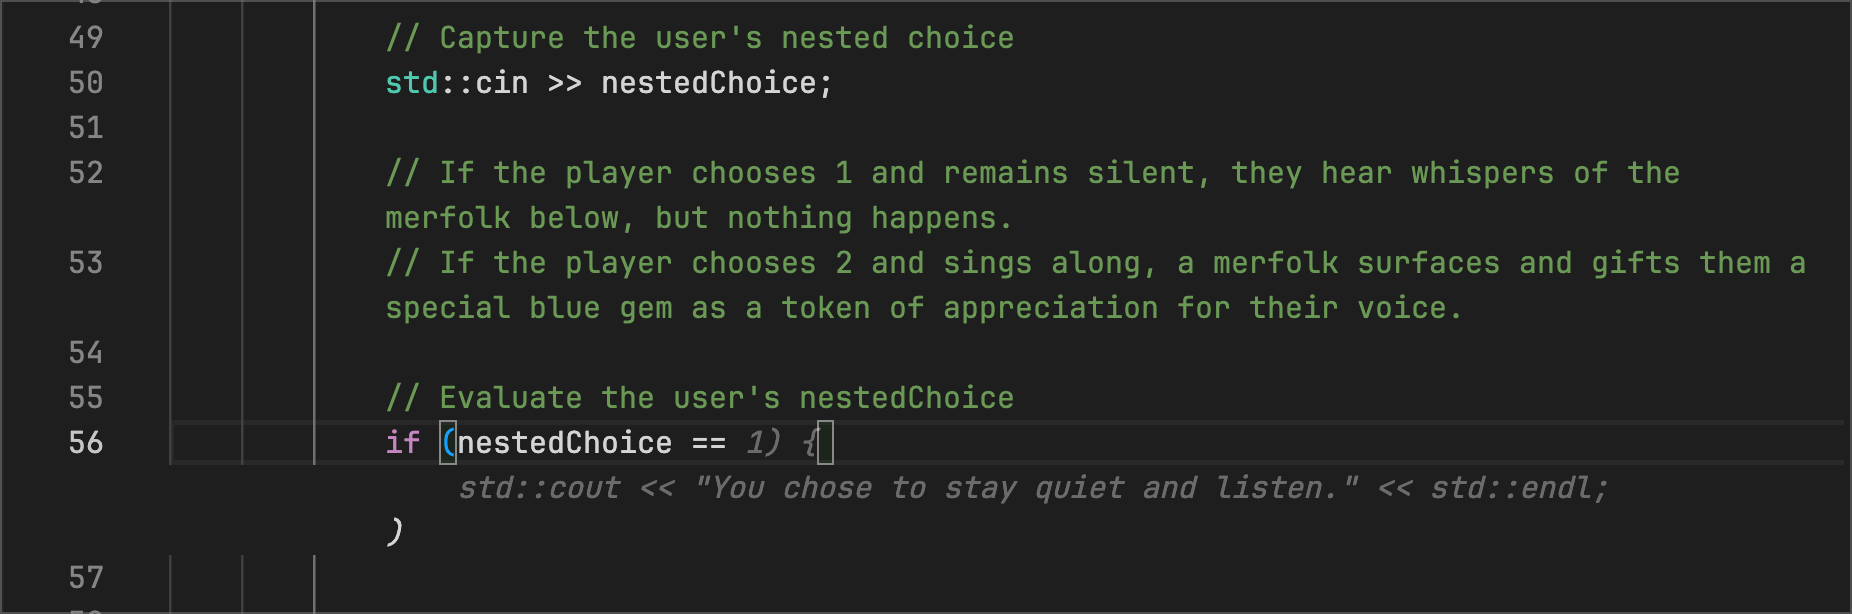 adventure.cpp - Code Suggestions starts to build out an if statement to handle the nestedChoice